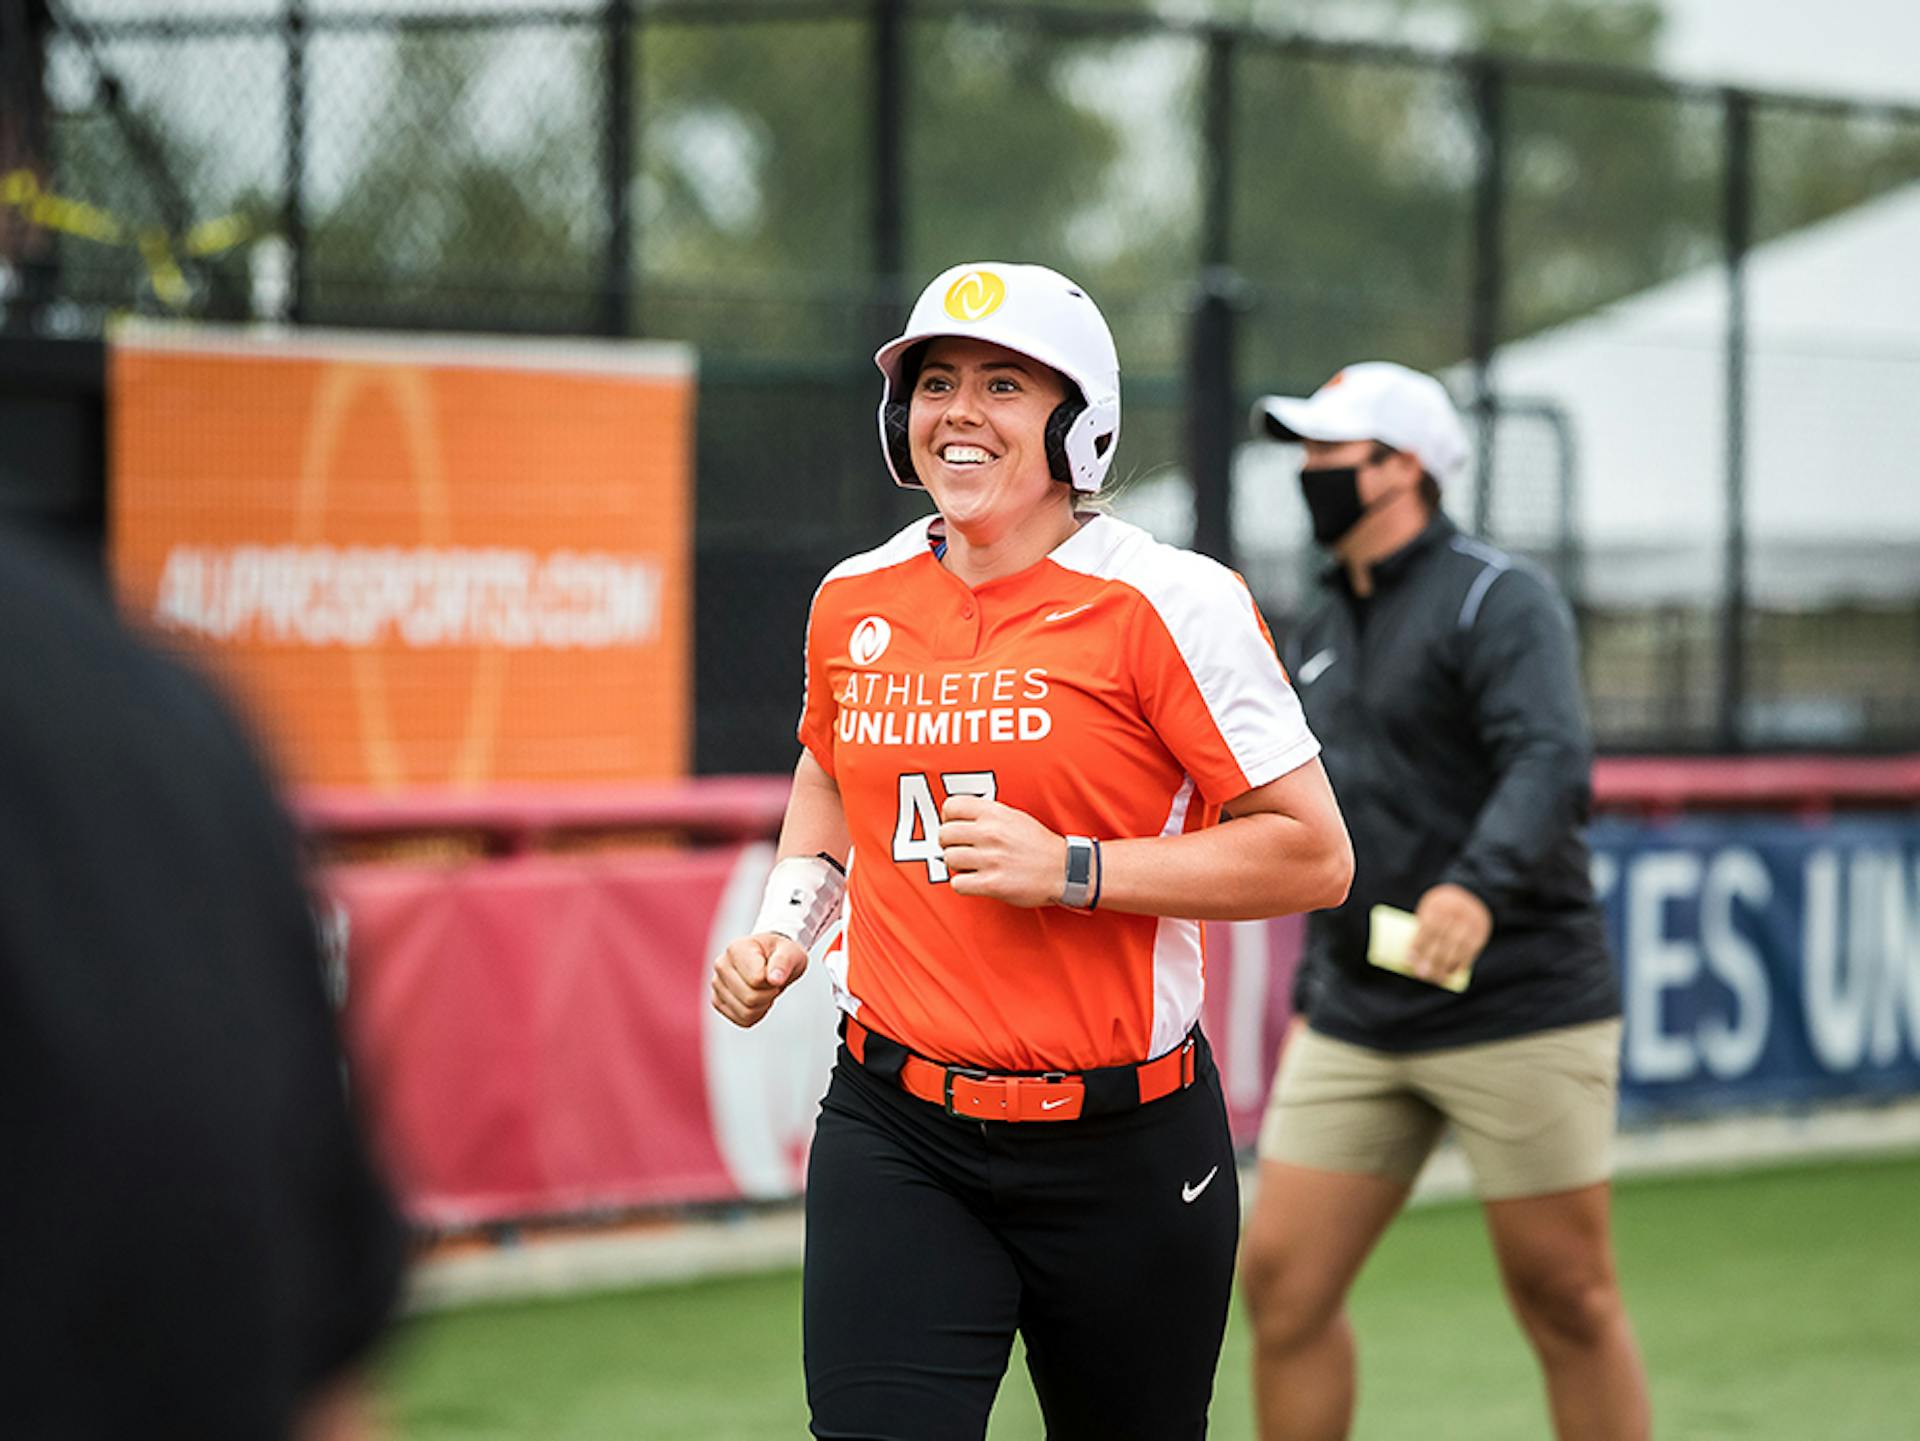 Amanda Chidester smiles after home run.